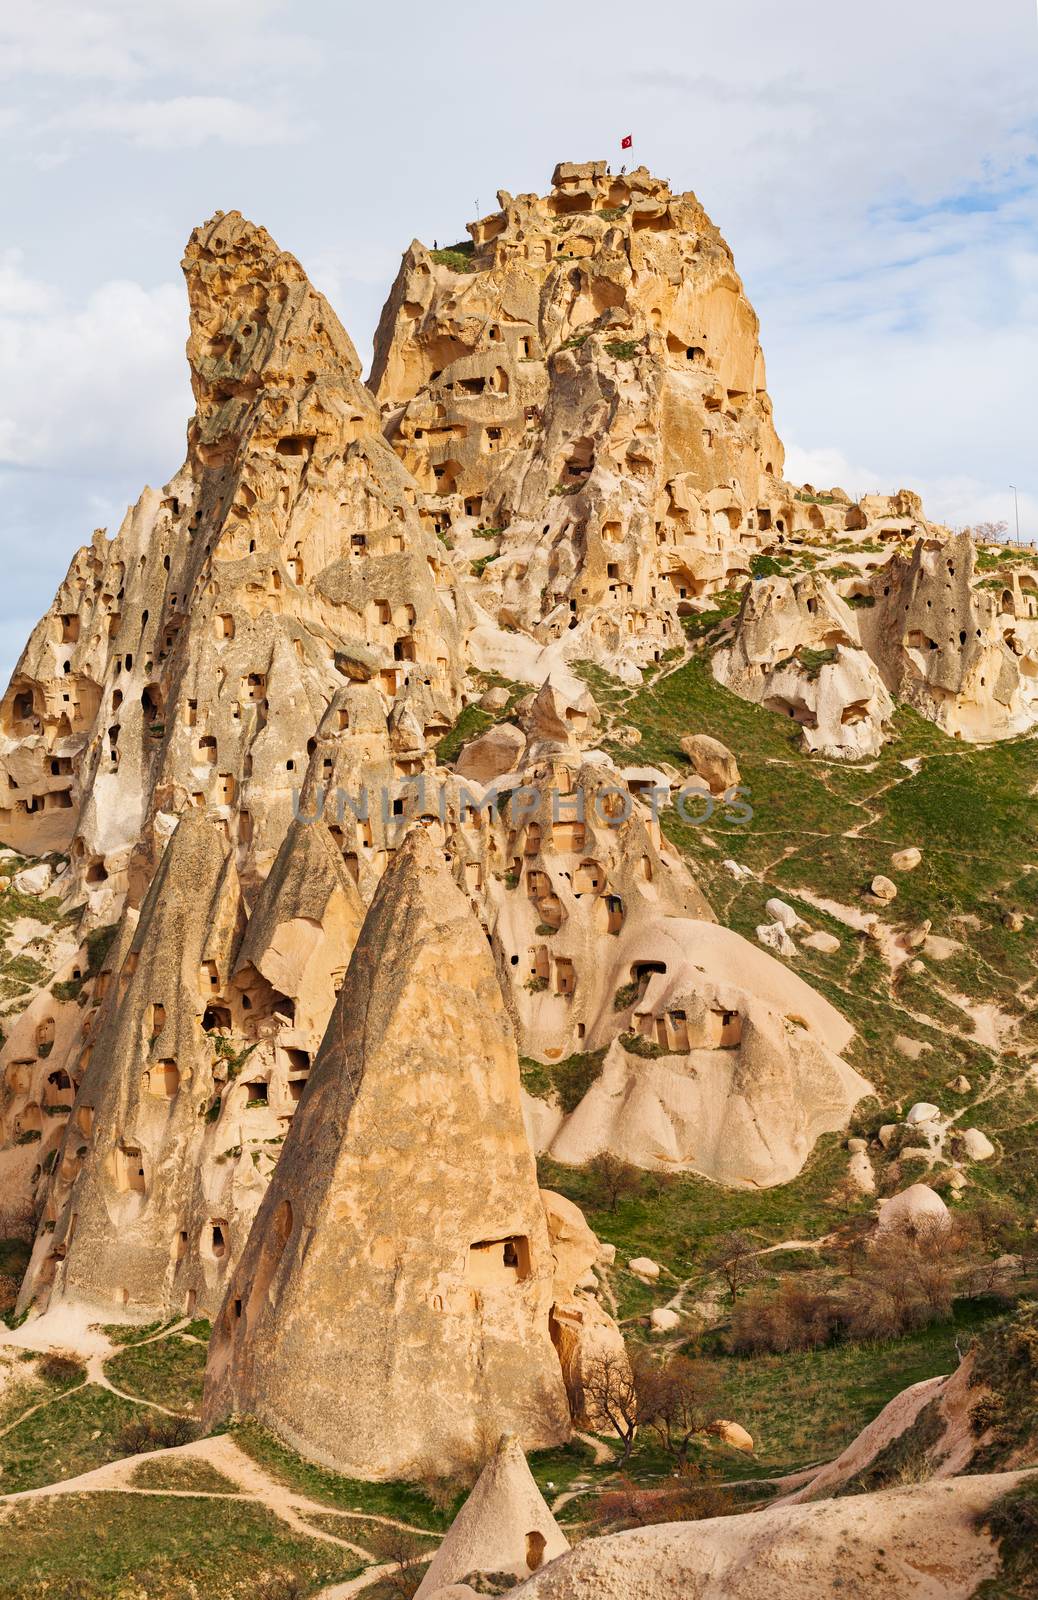 Stone cliffs and cave houses in Uchisar near Goreme, Turkey